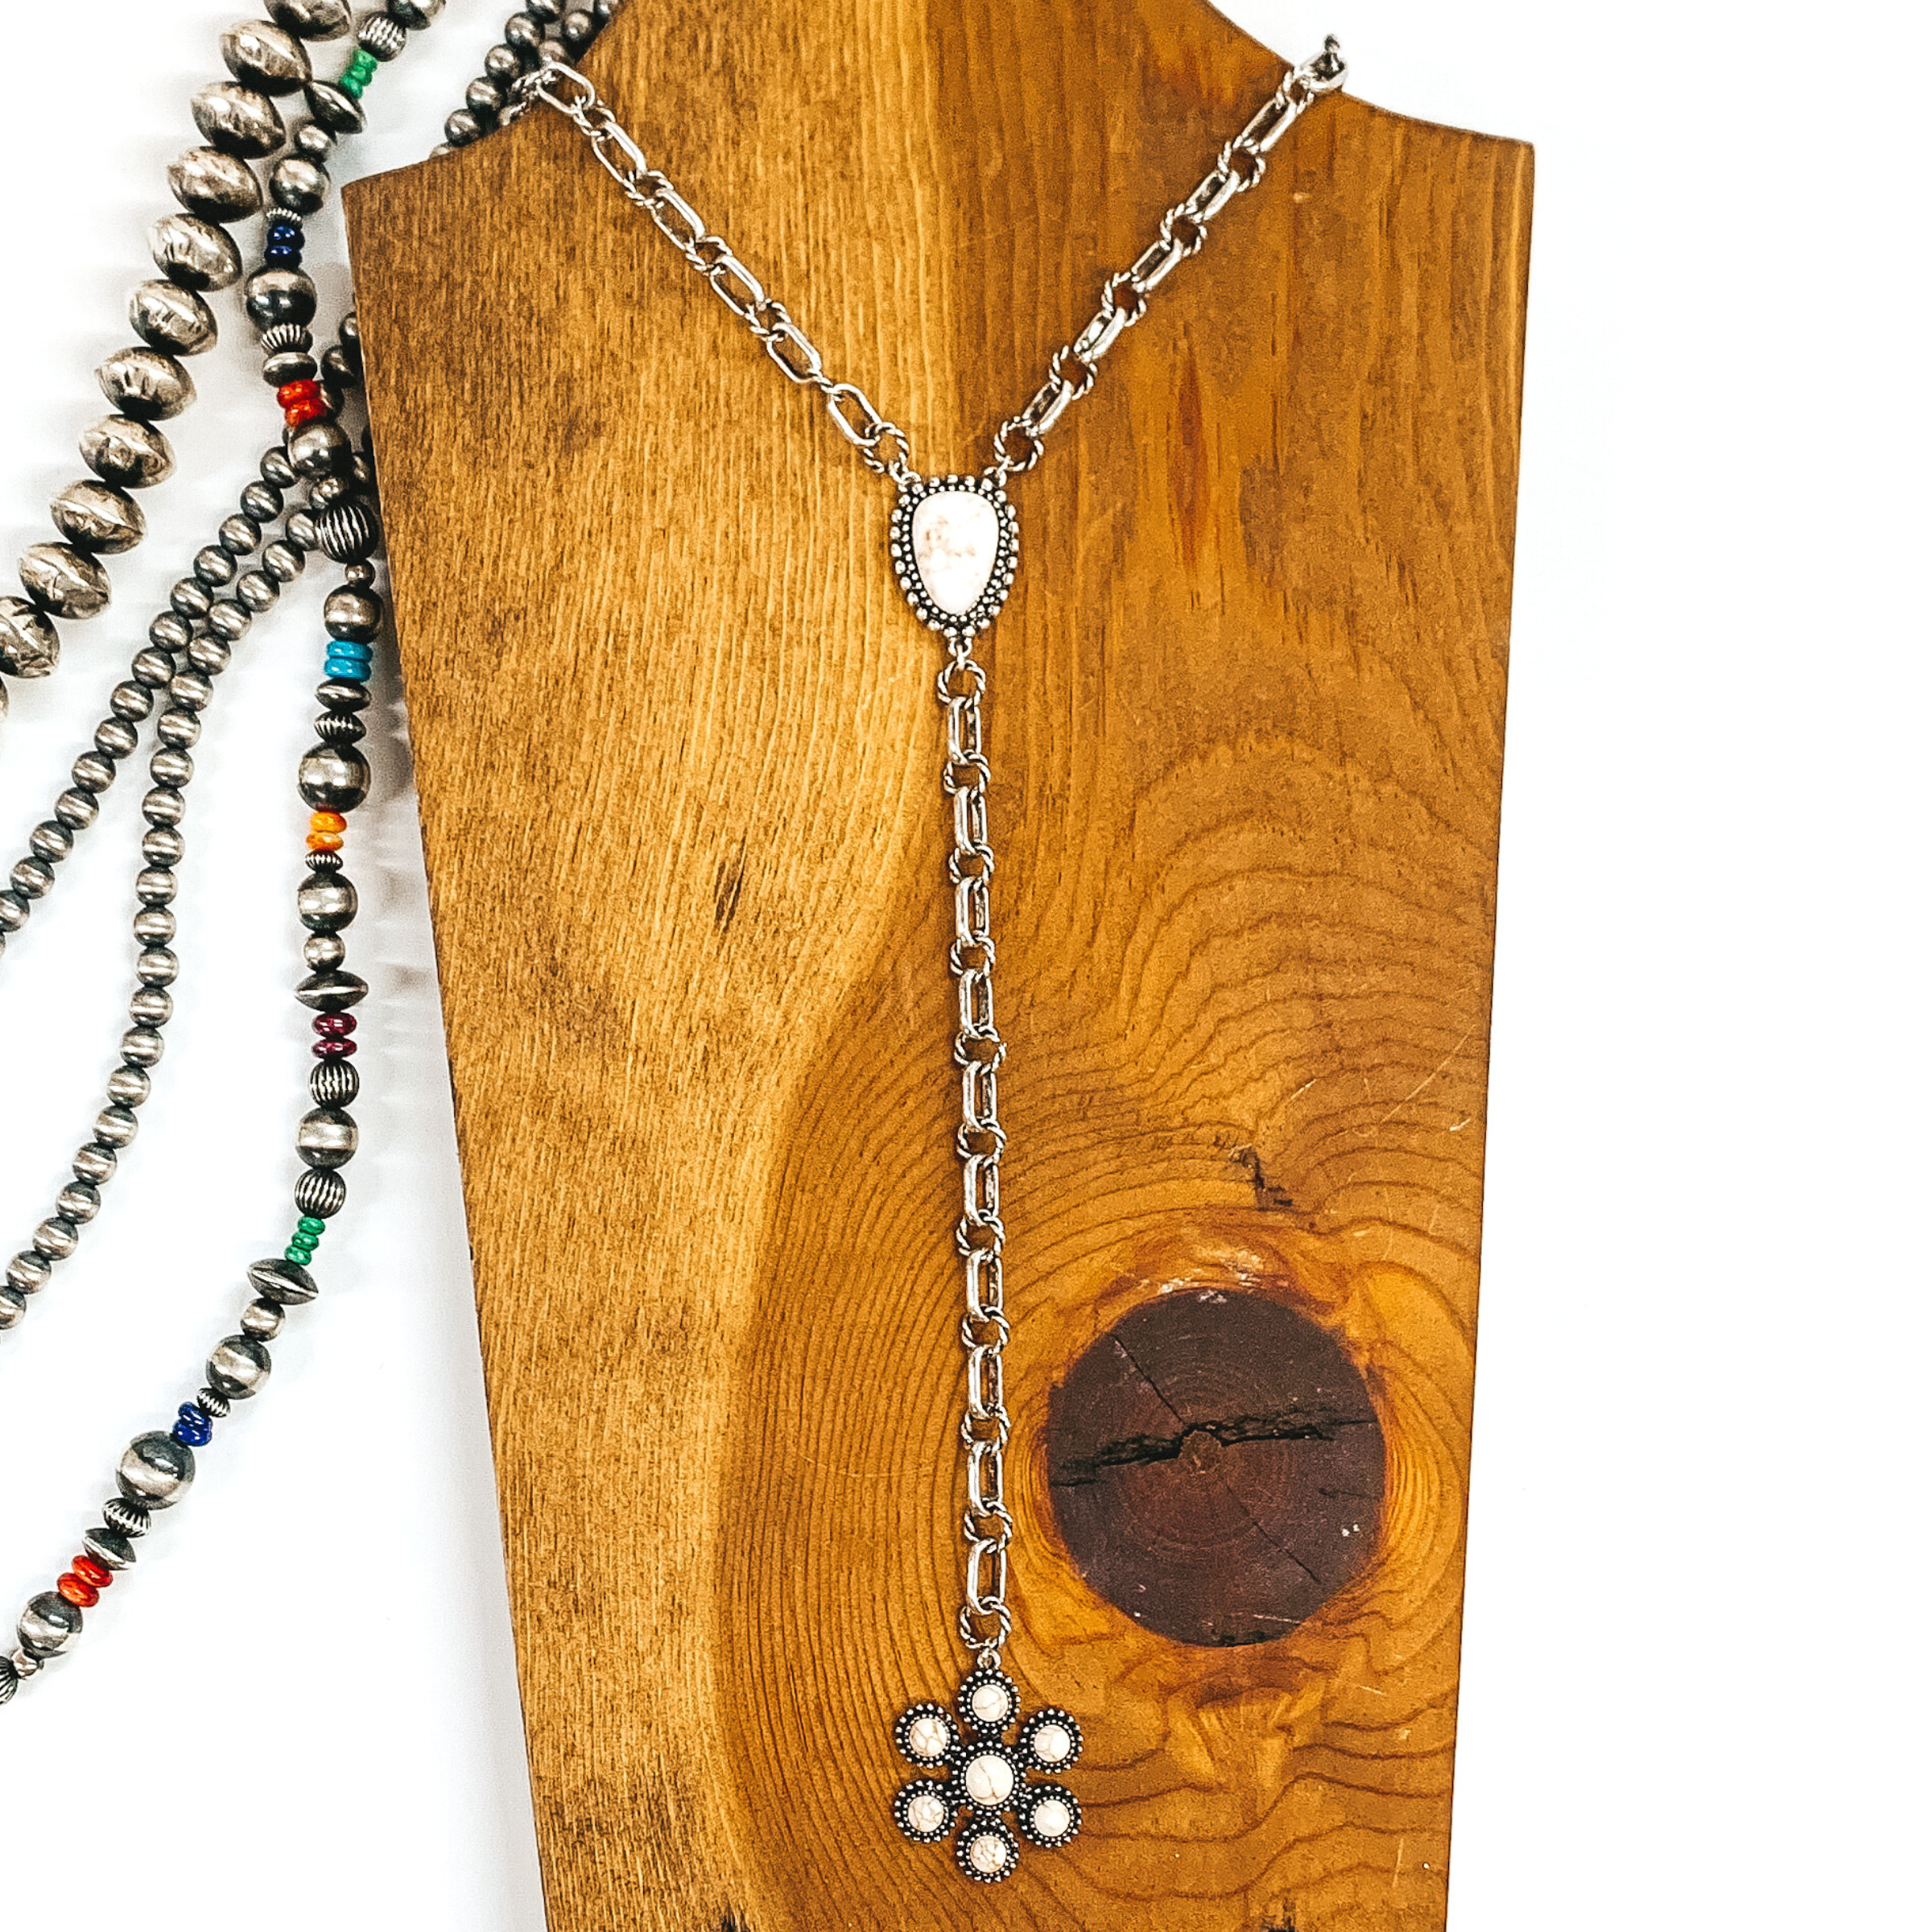 Silver chained necklace that is Navajo inspired with  an ivory irregular stoned pendant. Then hanging from the pendant, there is a hanging silver chain with a star burst pendant with ivory stones. This necklace is pictured on  wood necklace holder on a white background. It has different shaped and colored navajo strands. 